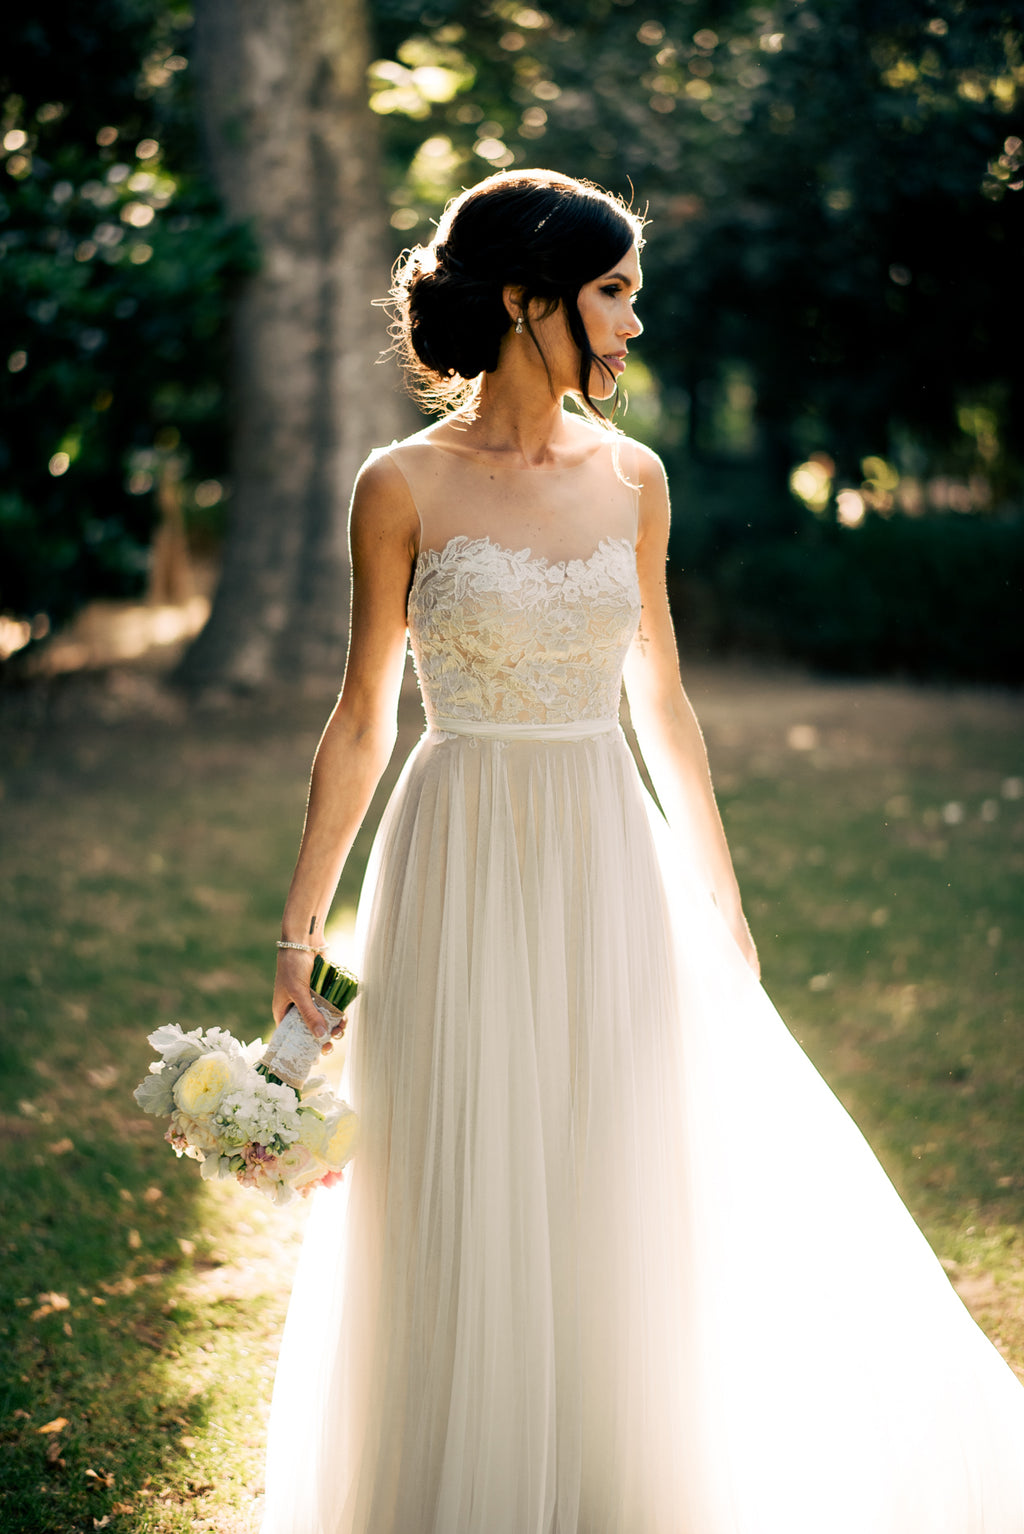 Romantic Open Back Tulle and Lace Wedding Dress - daisystyledress